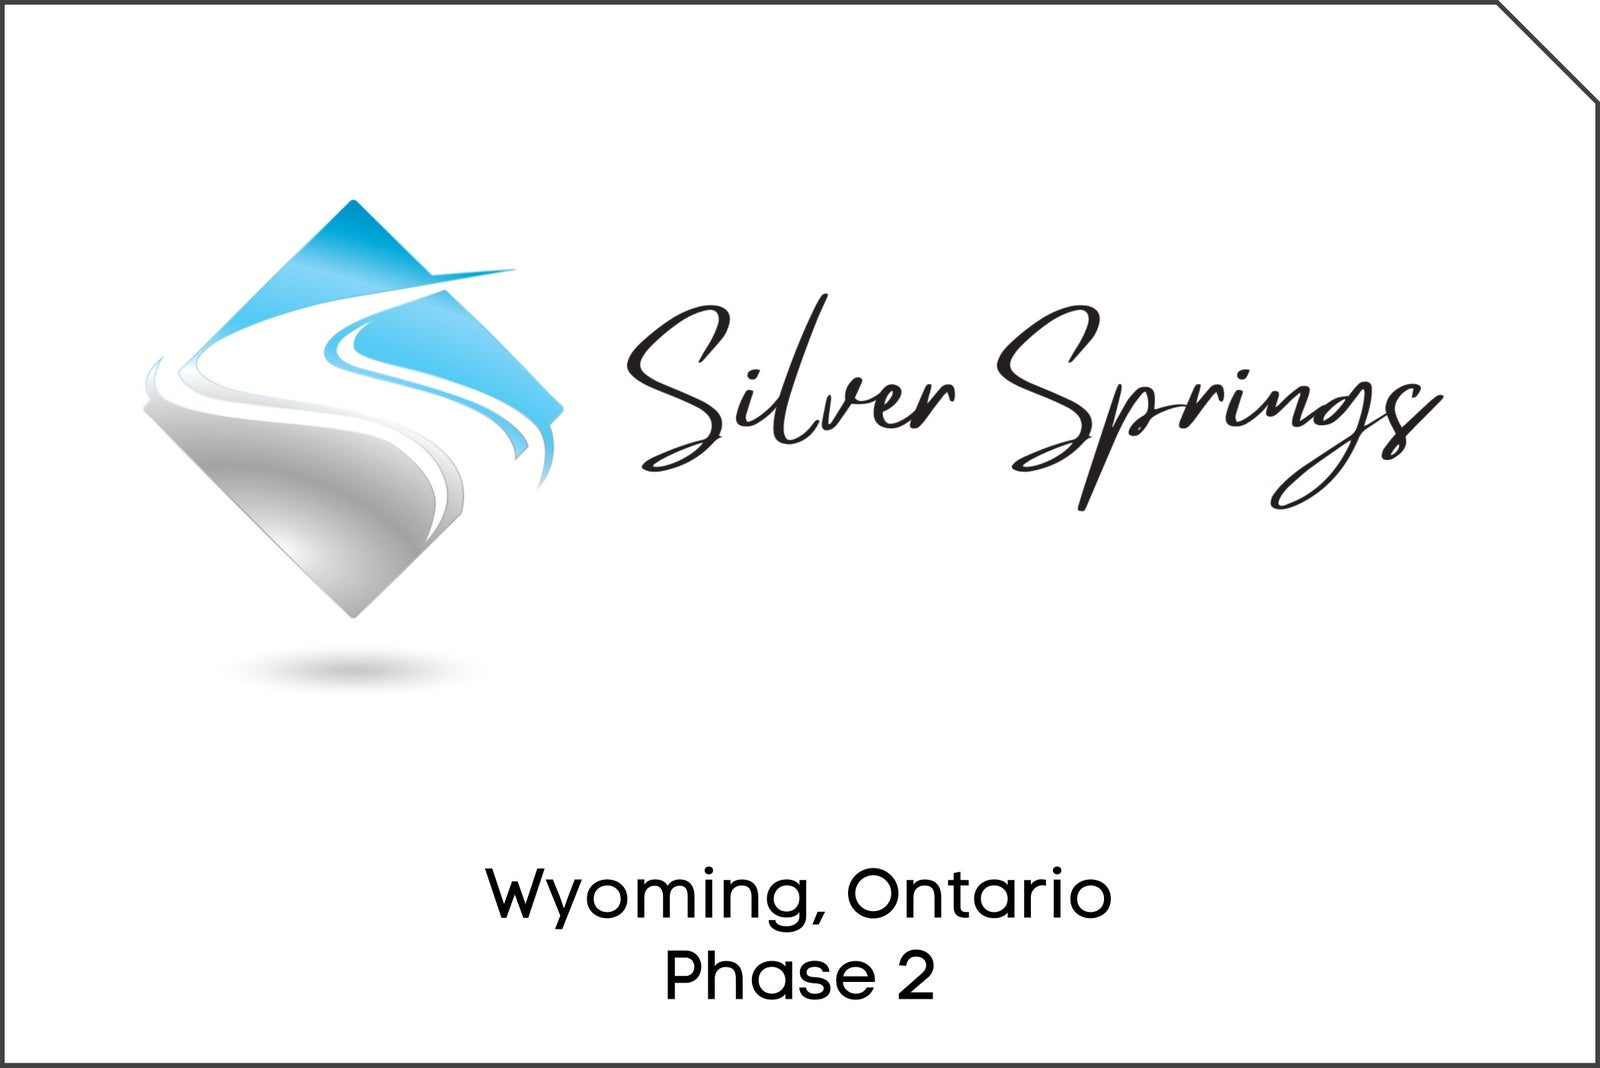 Silver Springs, Wyoming, Ontario New Homes, Radcliffe 